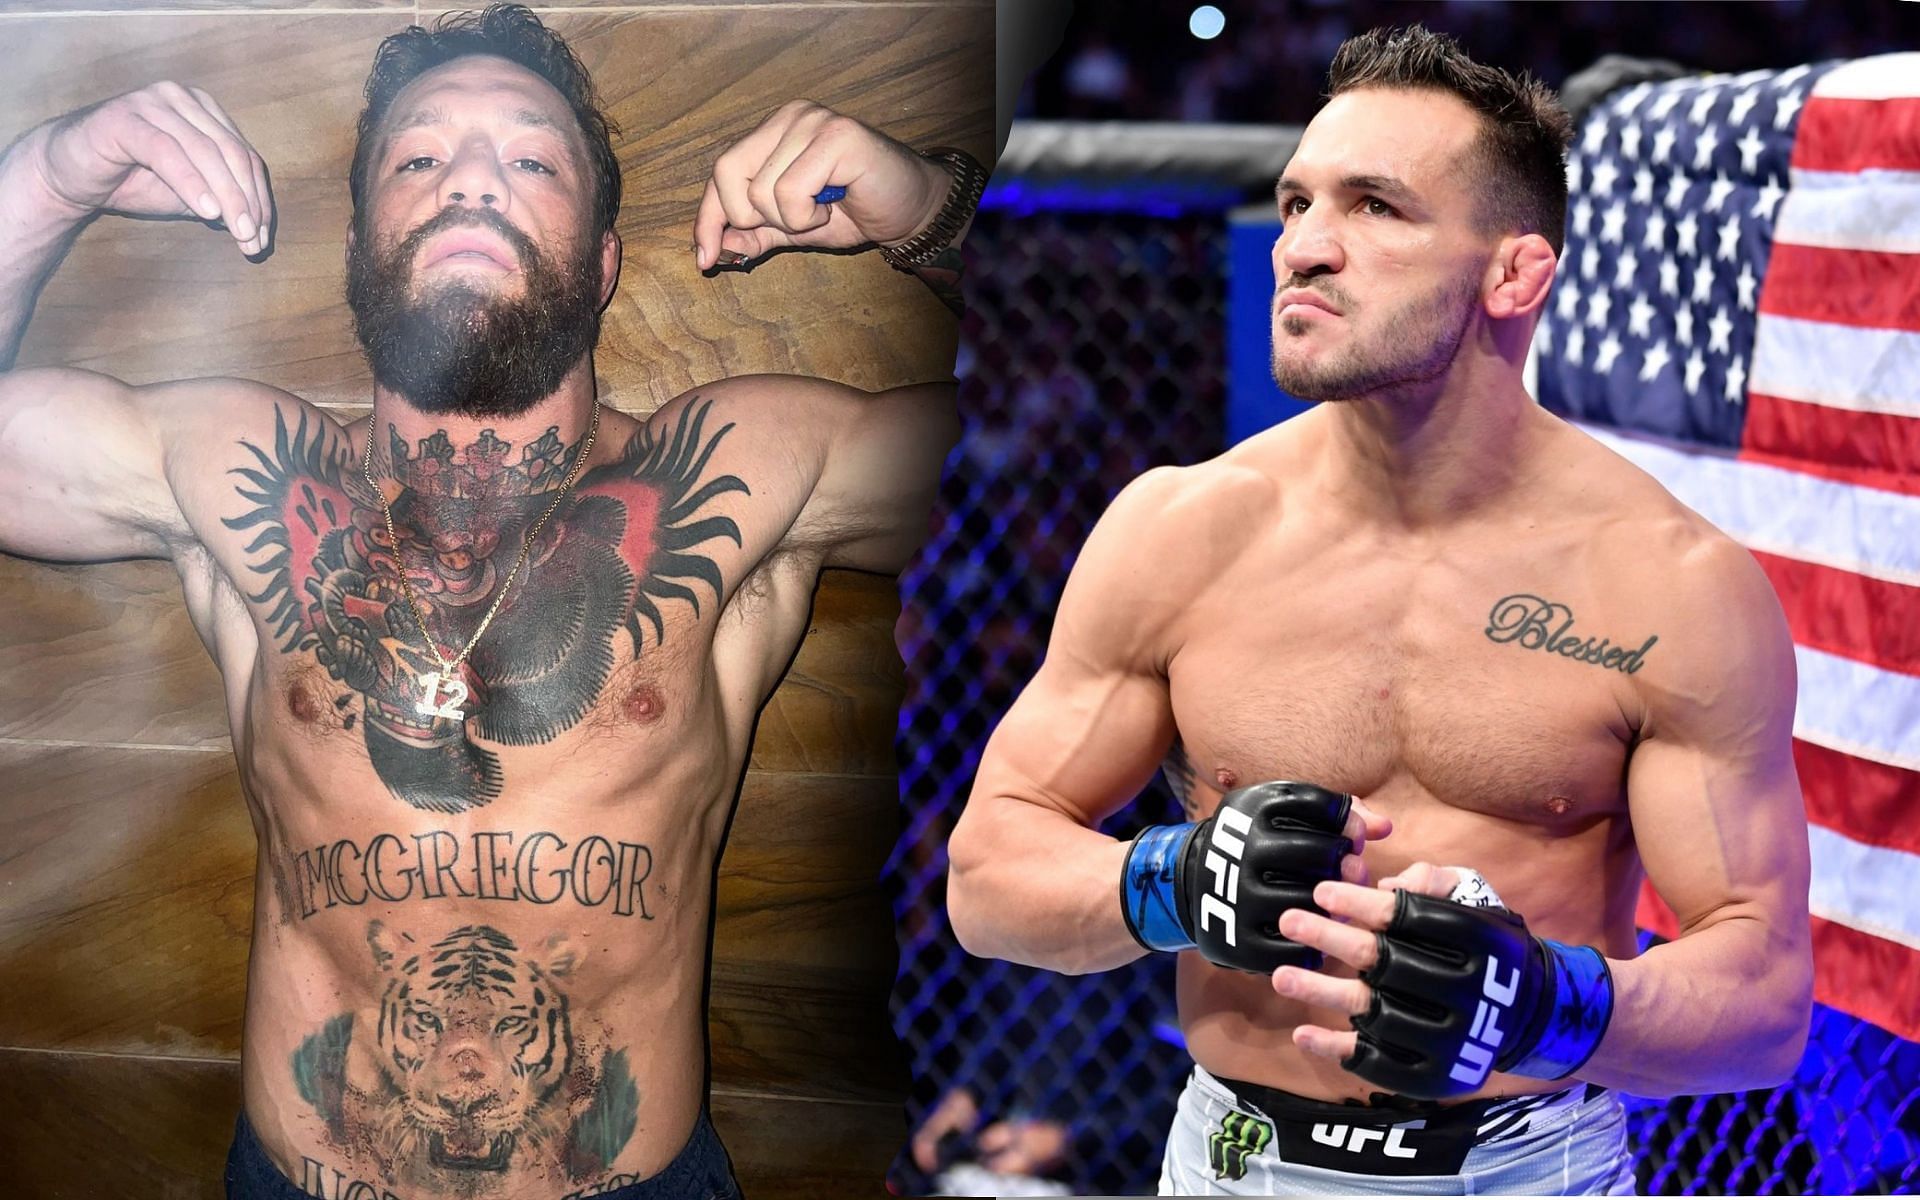 Michael Chandler plans to pressure Conor McGregor into entering the USADA testing pool to confirm September bout. [Image credits: @thenotoriousmma on Instagram; Getty Images] 